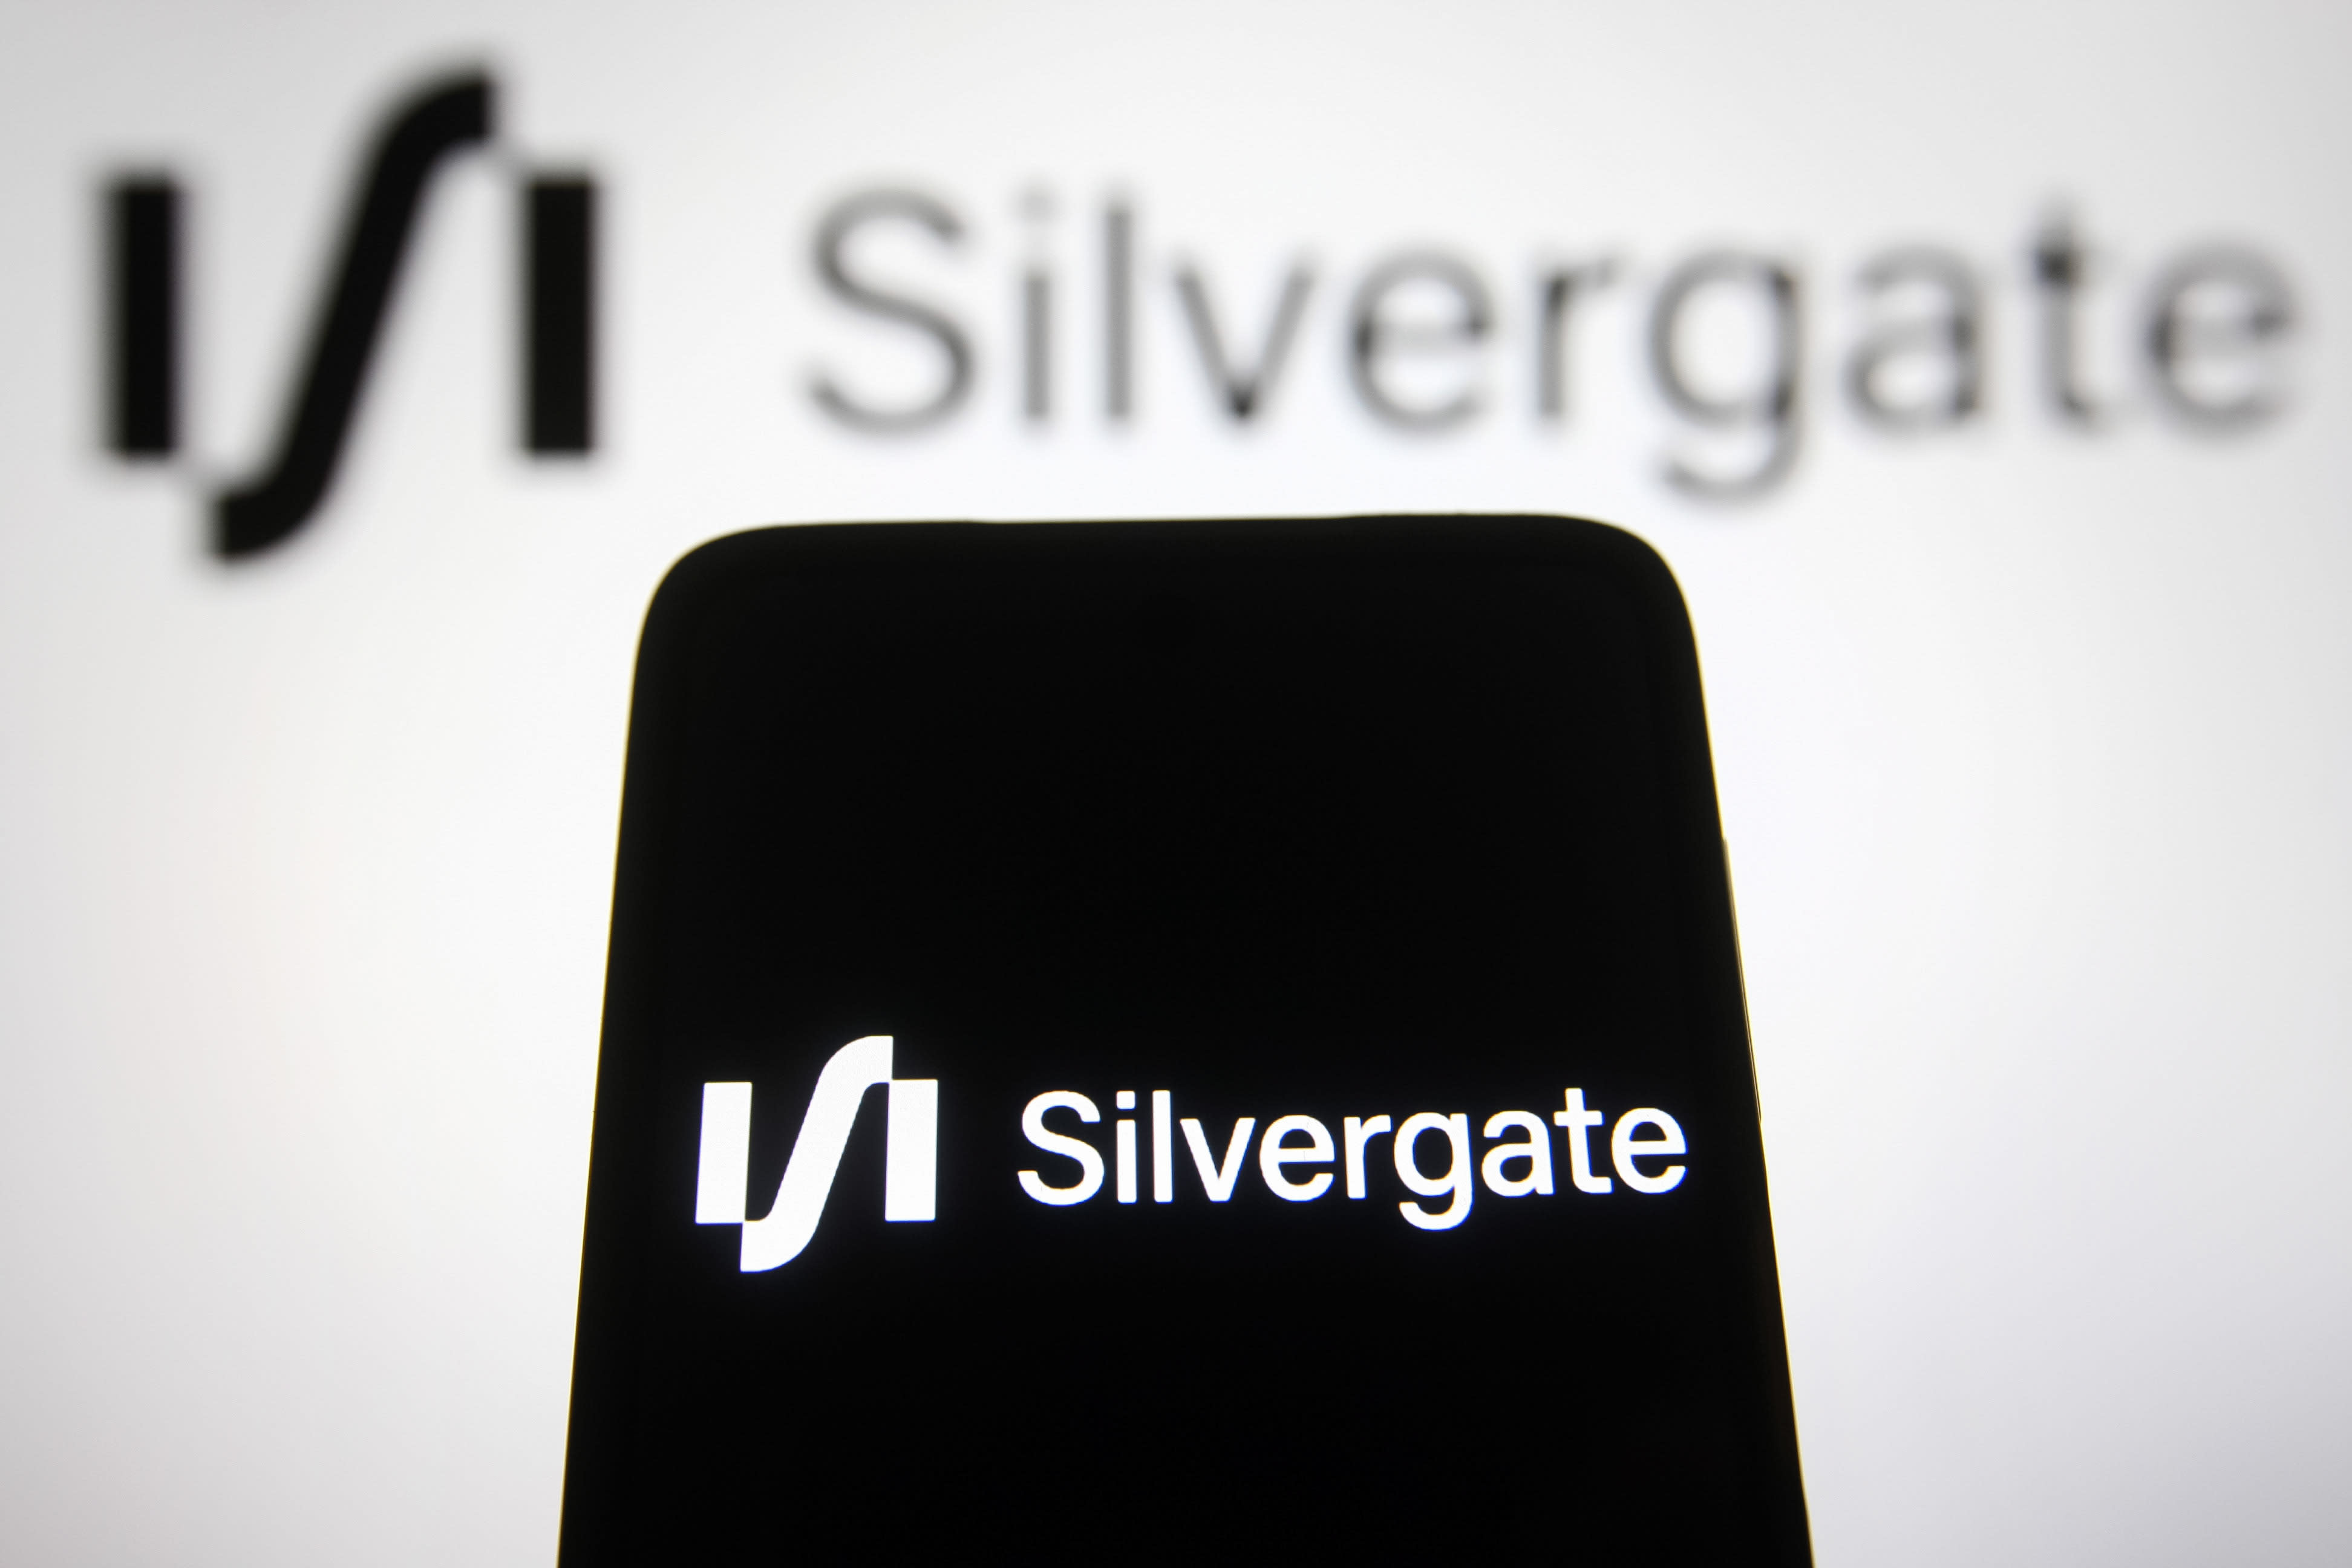 Morgan Stanley downgrades Silvergate Capital, says it's time to sell stock after FTX collapse